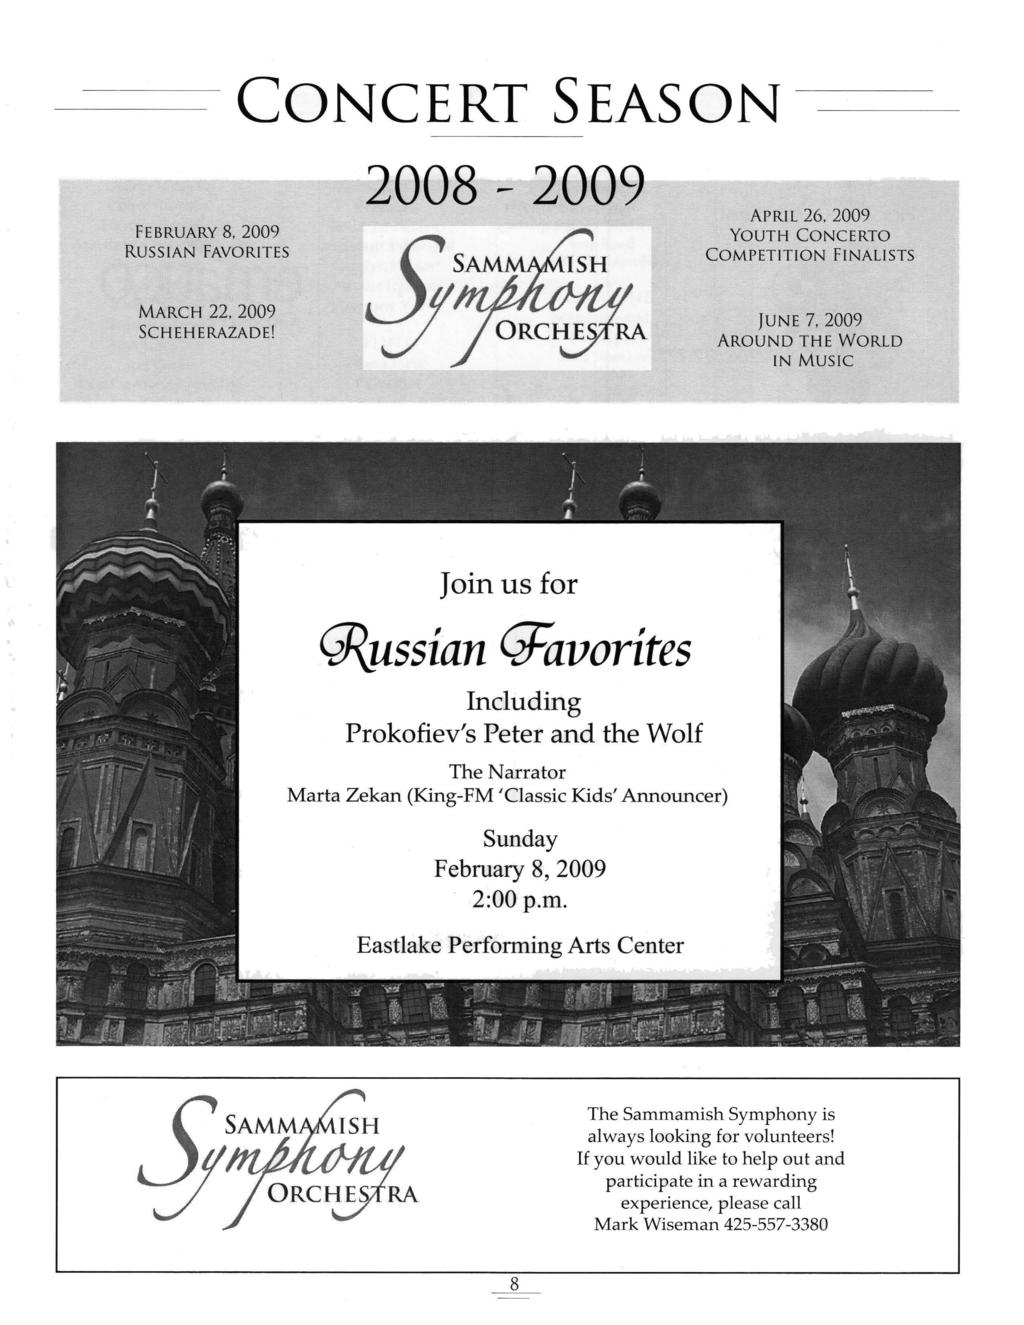 FEBRUARY 8, 2009 RUSSIAN FAVORITES CONCERT SEASON 2008-2009 APRIL 26, 2009 YOUTH CONCERTO COMPETITION FINALISTS MARCH 22, 2009 SCHEHERAZADE!